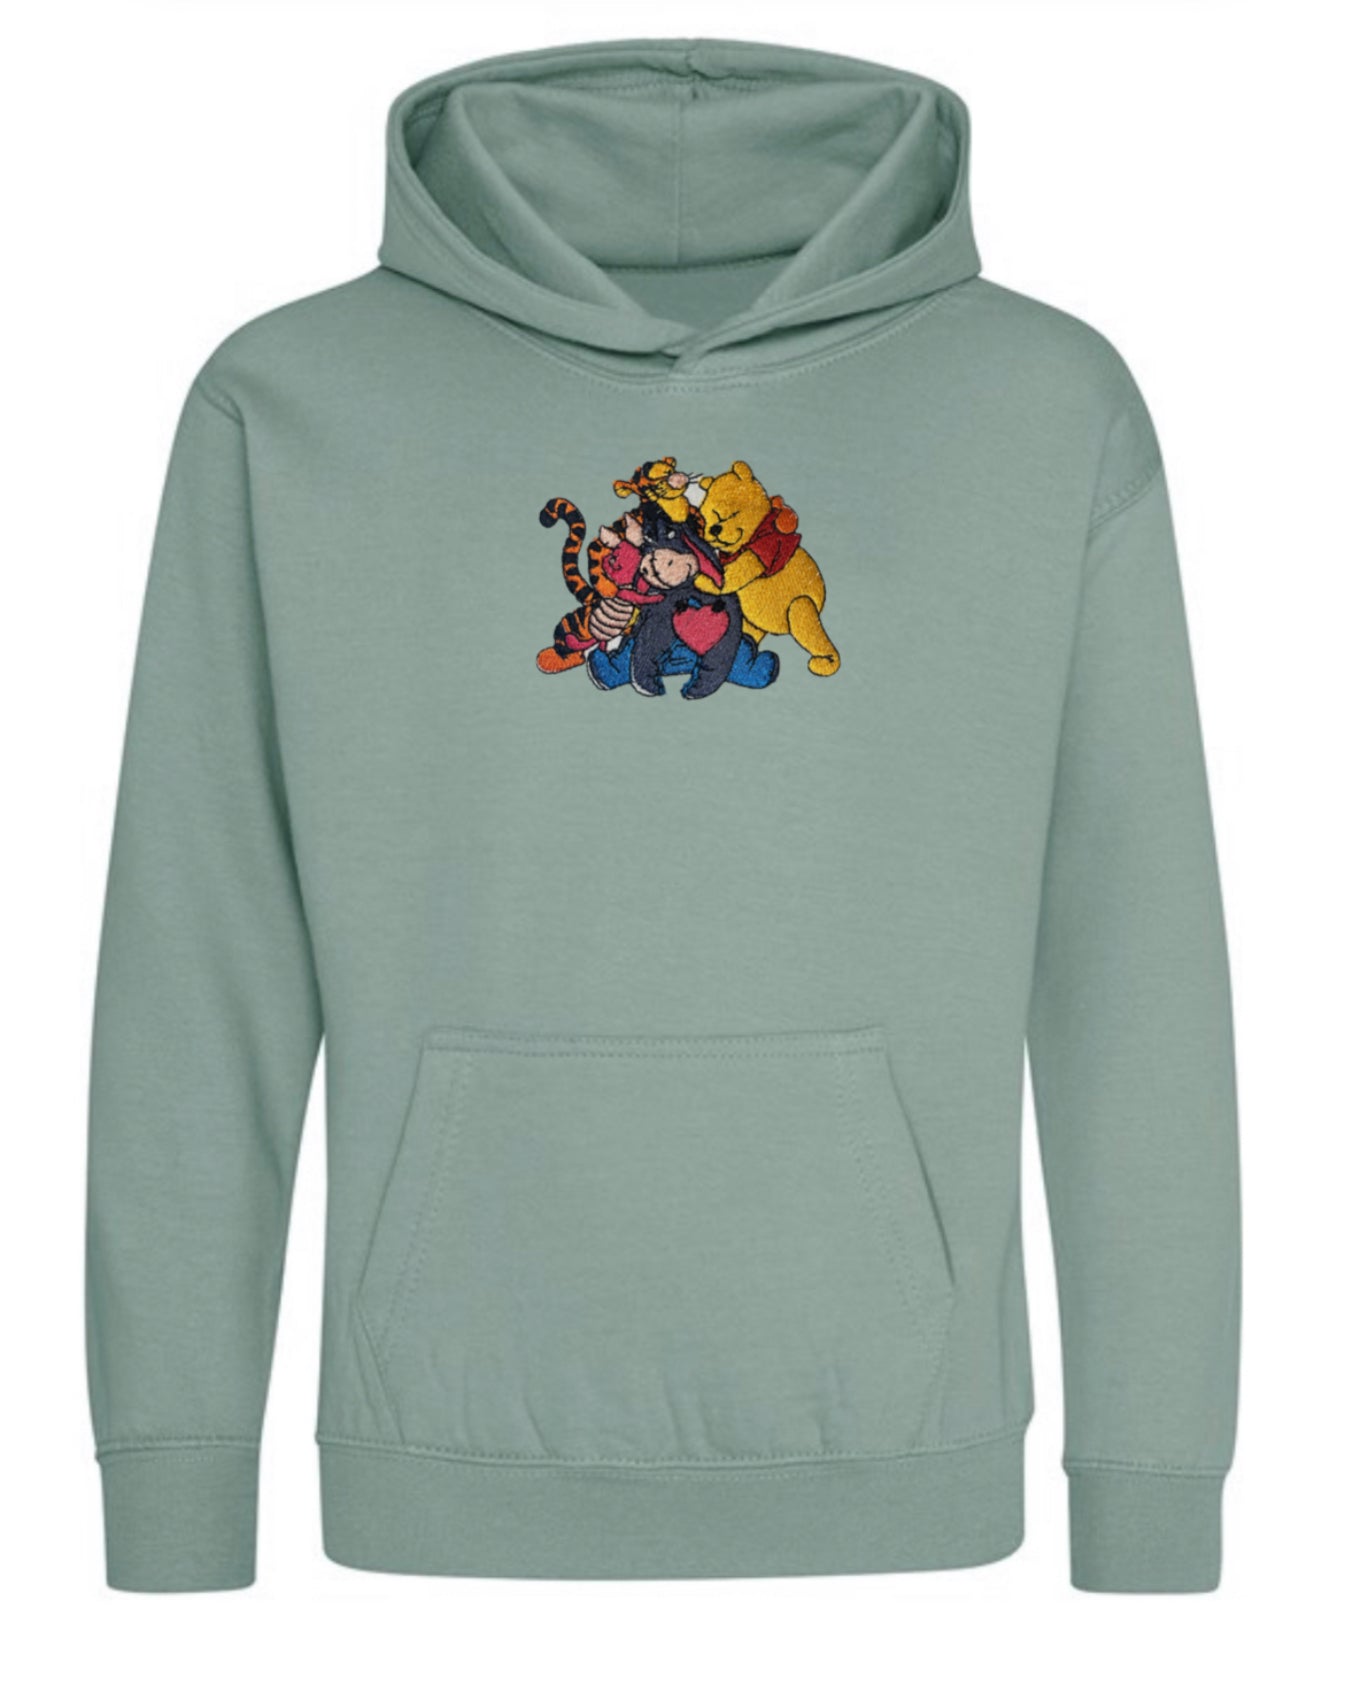 Winnie The Pooh & Friends Hoodie For Adults and Children